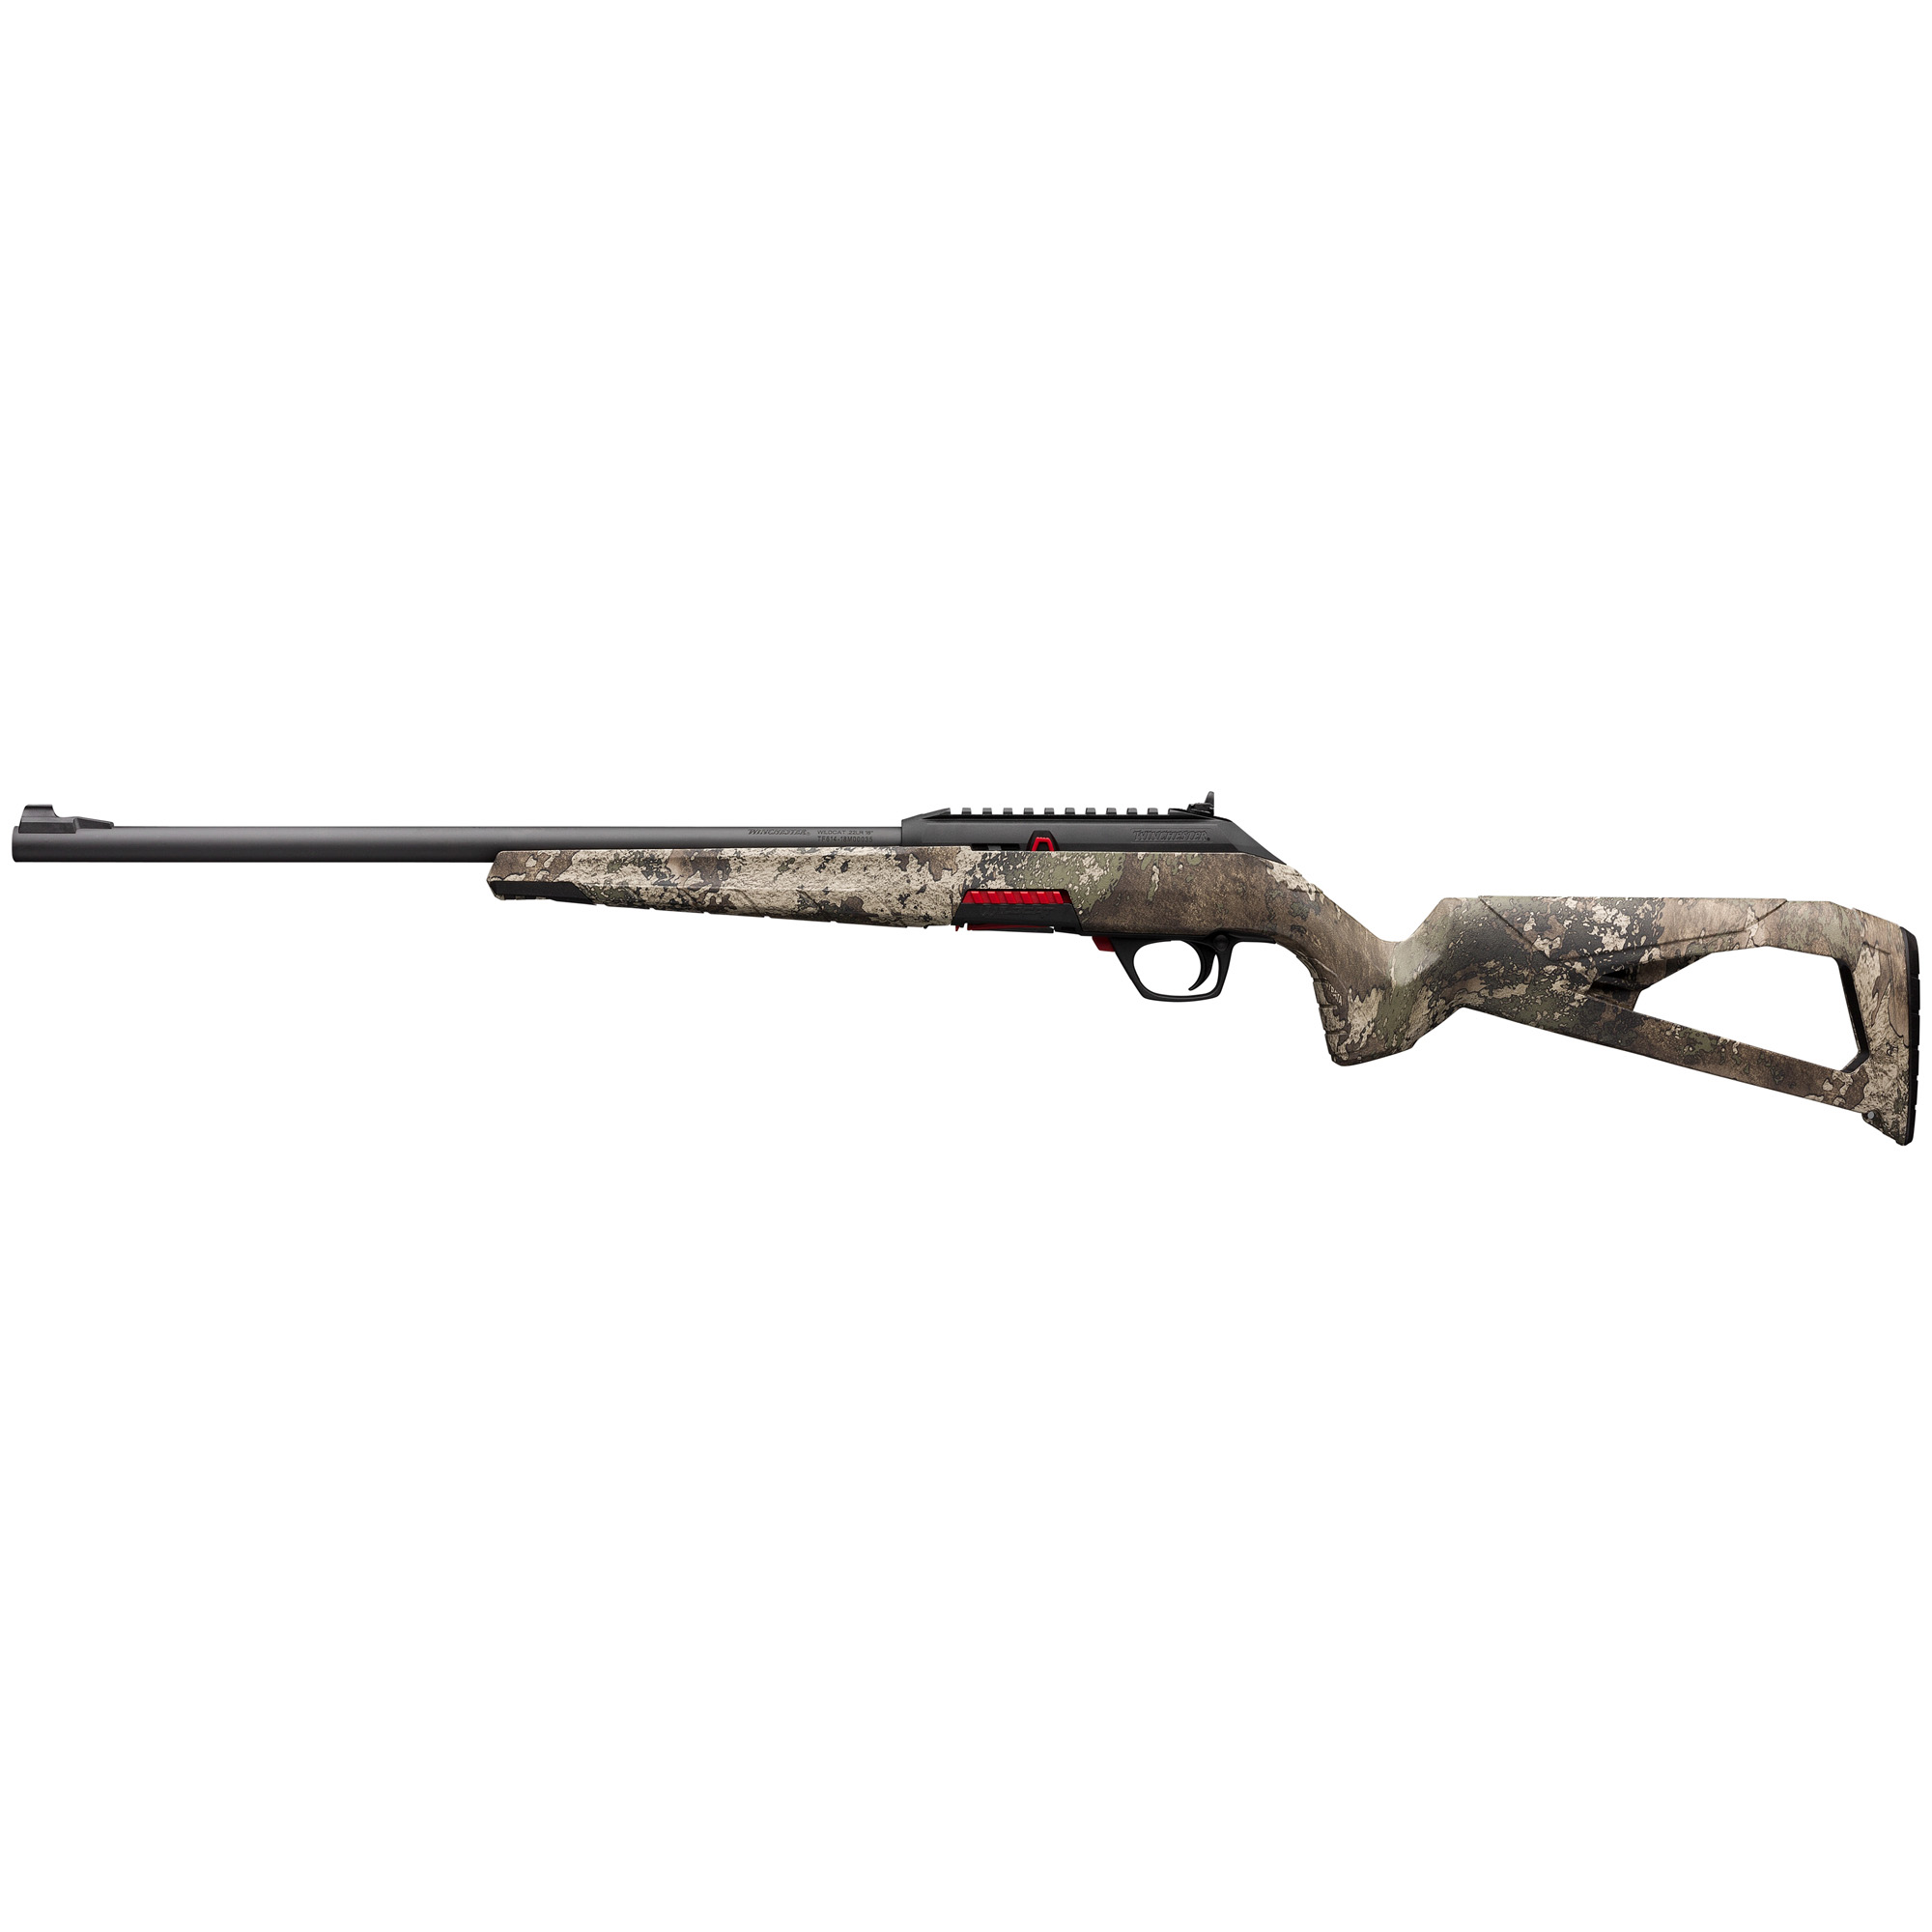 Winchester Repeating Arms, Wildcat, Semi-automatic Rifle, 22 LR, 18" Sporter Contour Barrel, True Timber Strata, Right Hand, Ghost Ring Sight, Composite Stock, 10 Rounds